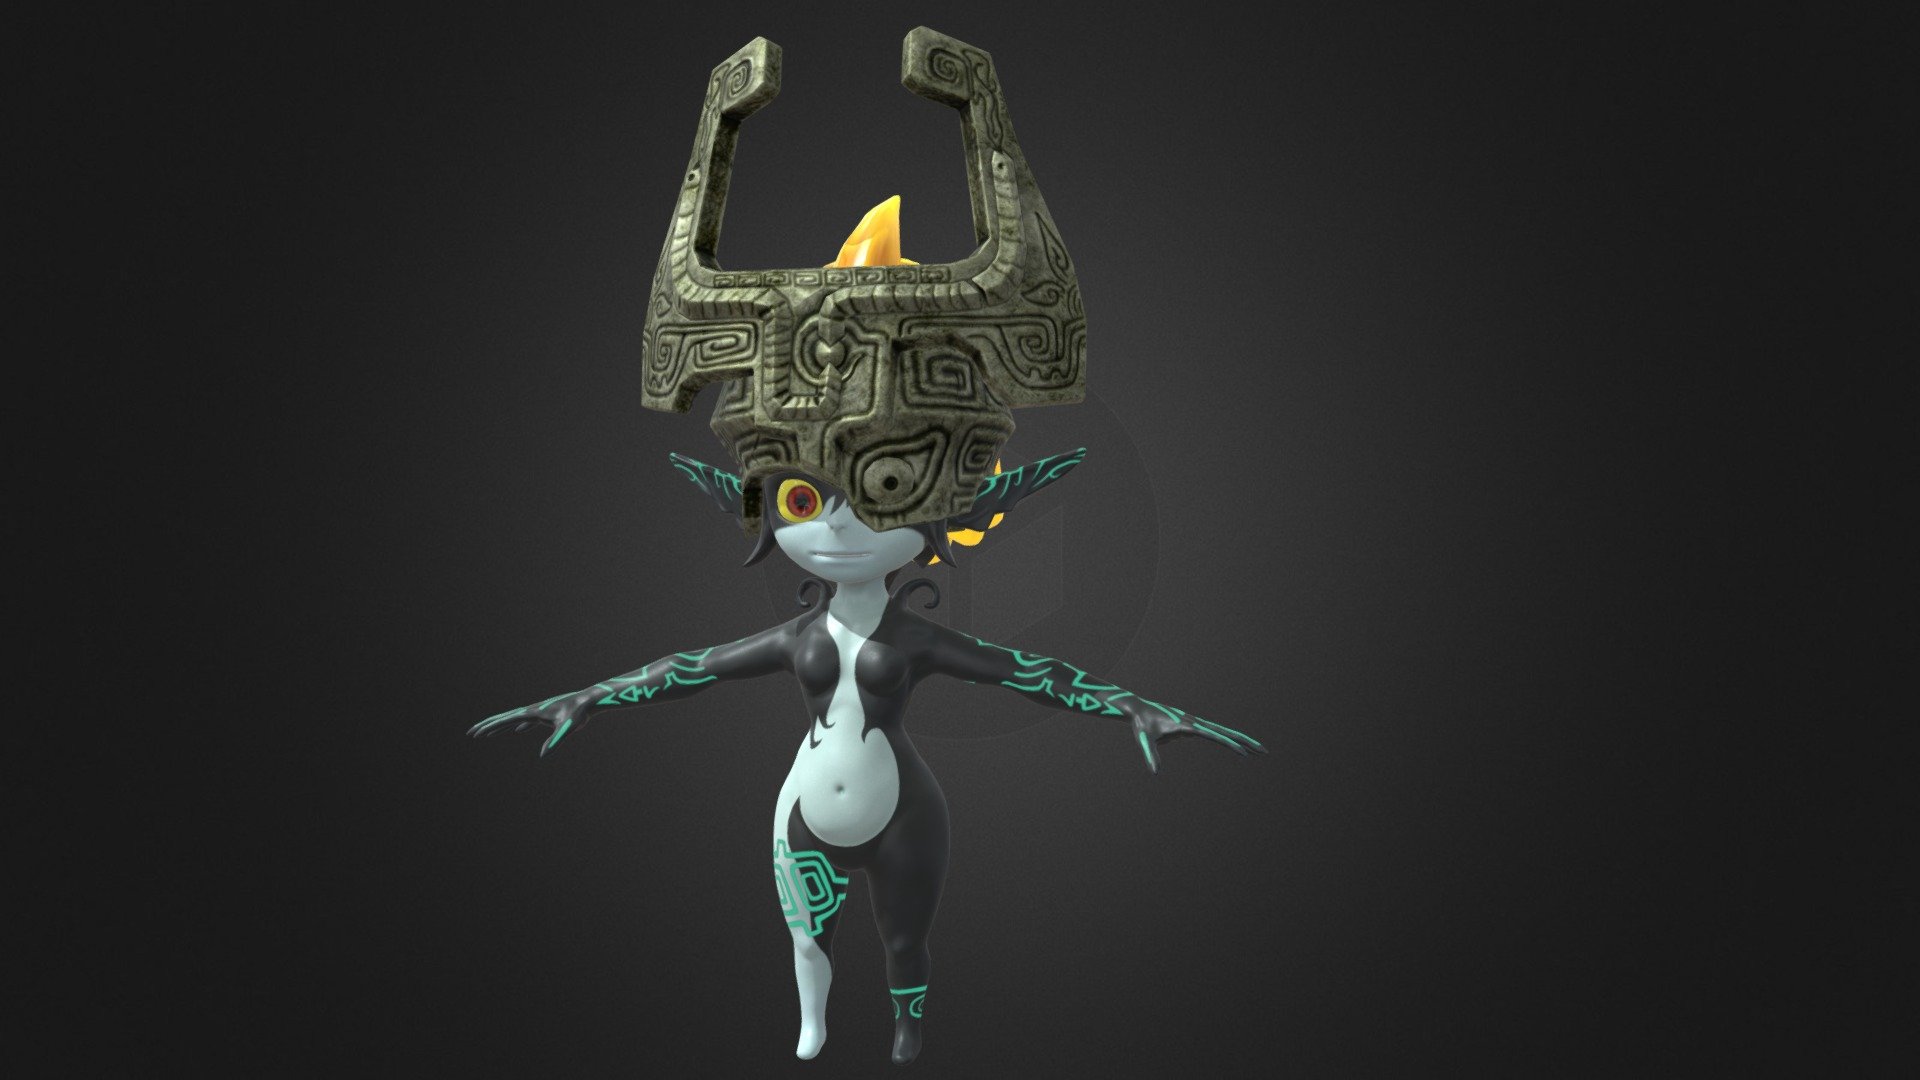 Game ready Midna with 4k textures from the Legend of Zelda Twilight Princess. Body sculpted in ZBrush, Helmet modeled in Maya/detailed in ZBrush, textured in Substance Painter - Midna 4K textures (Static Pose) - 3D model by KiwiLemonJuice (@KiwiLemonJuice_) 3d model